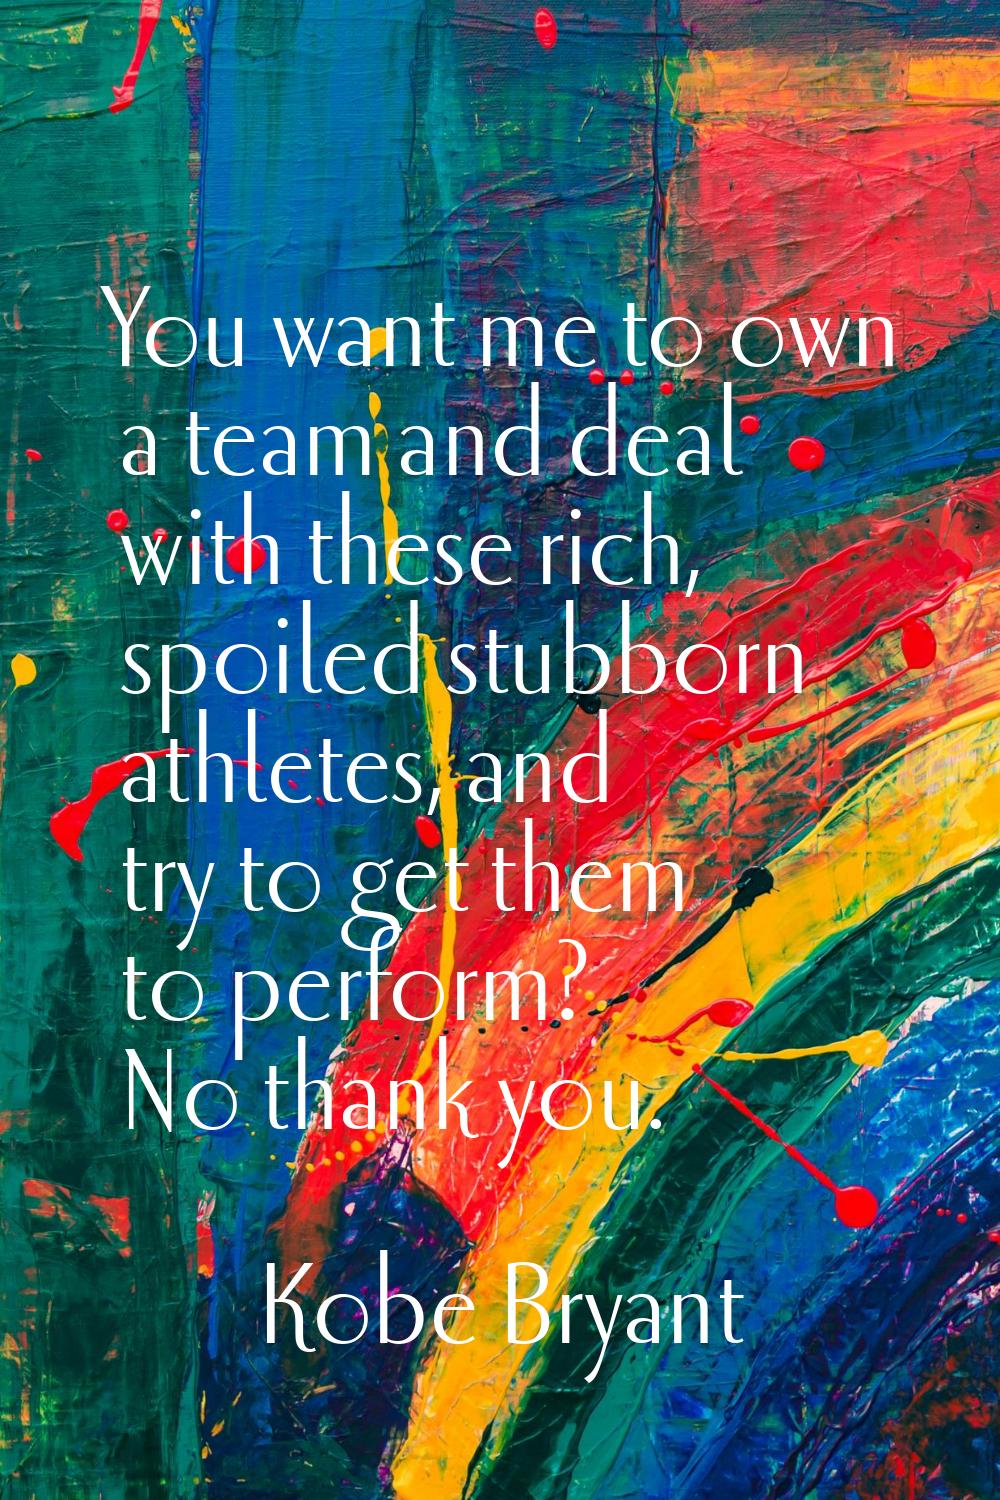 You want me to own a team and deal with these rich, spoiled stubborn athletes, and try to get them 